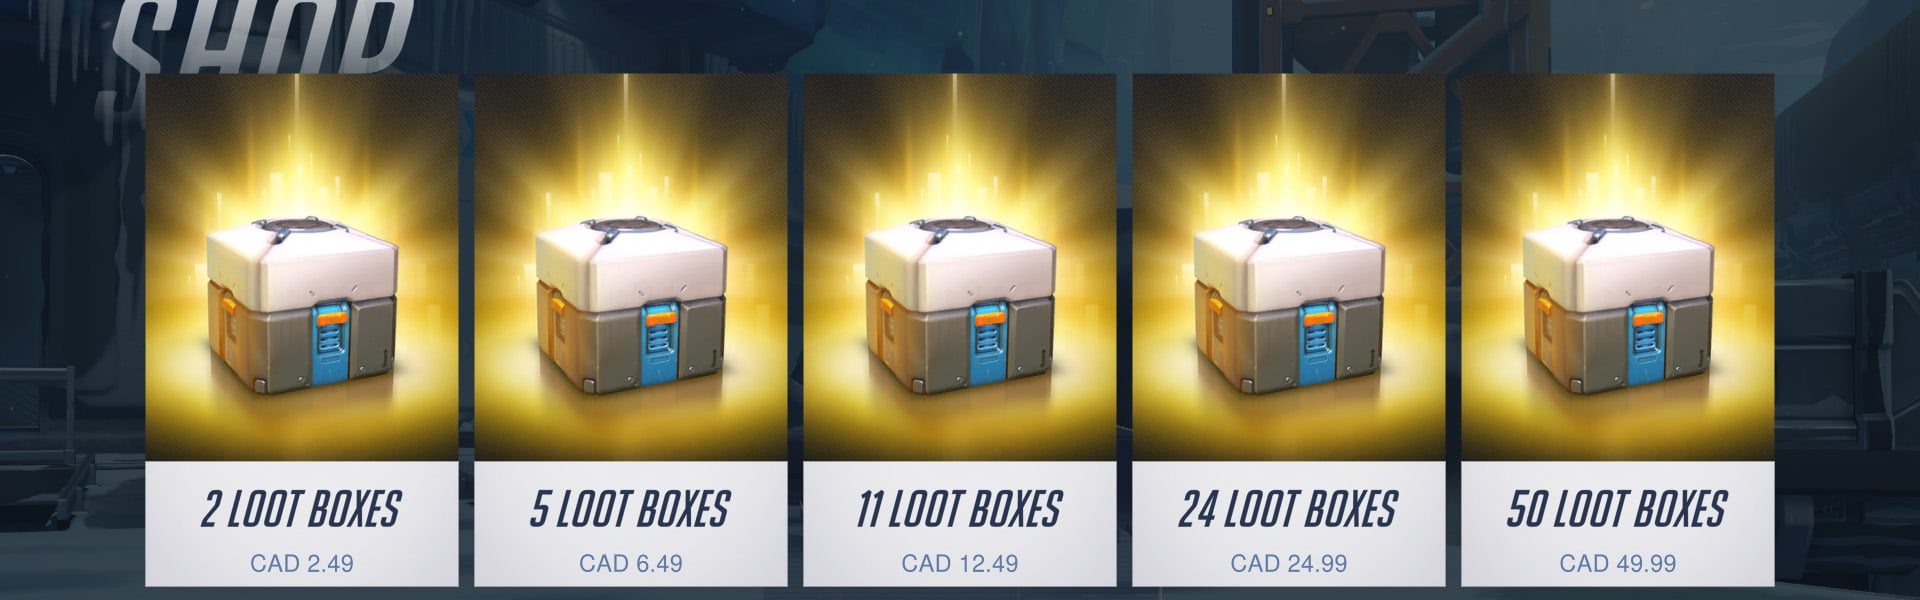 Why Online Casinos Hate Loot Boxes! 18